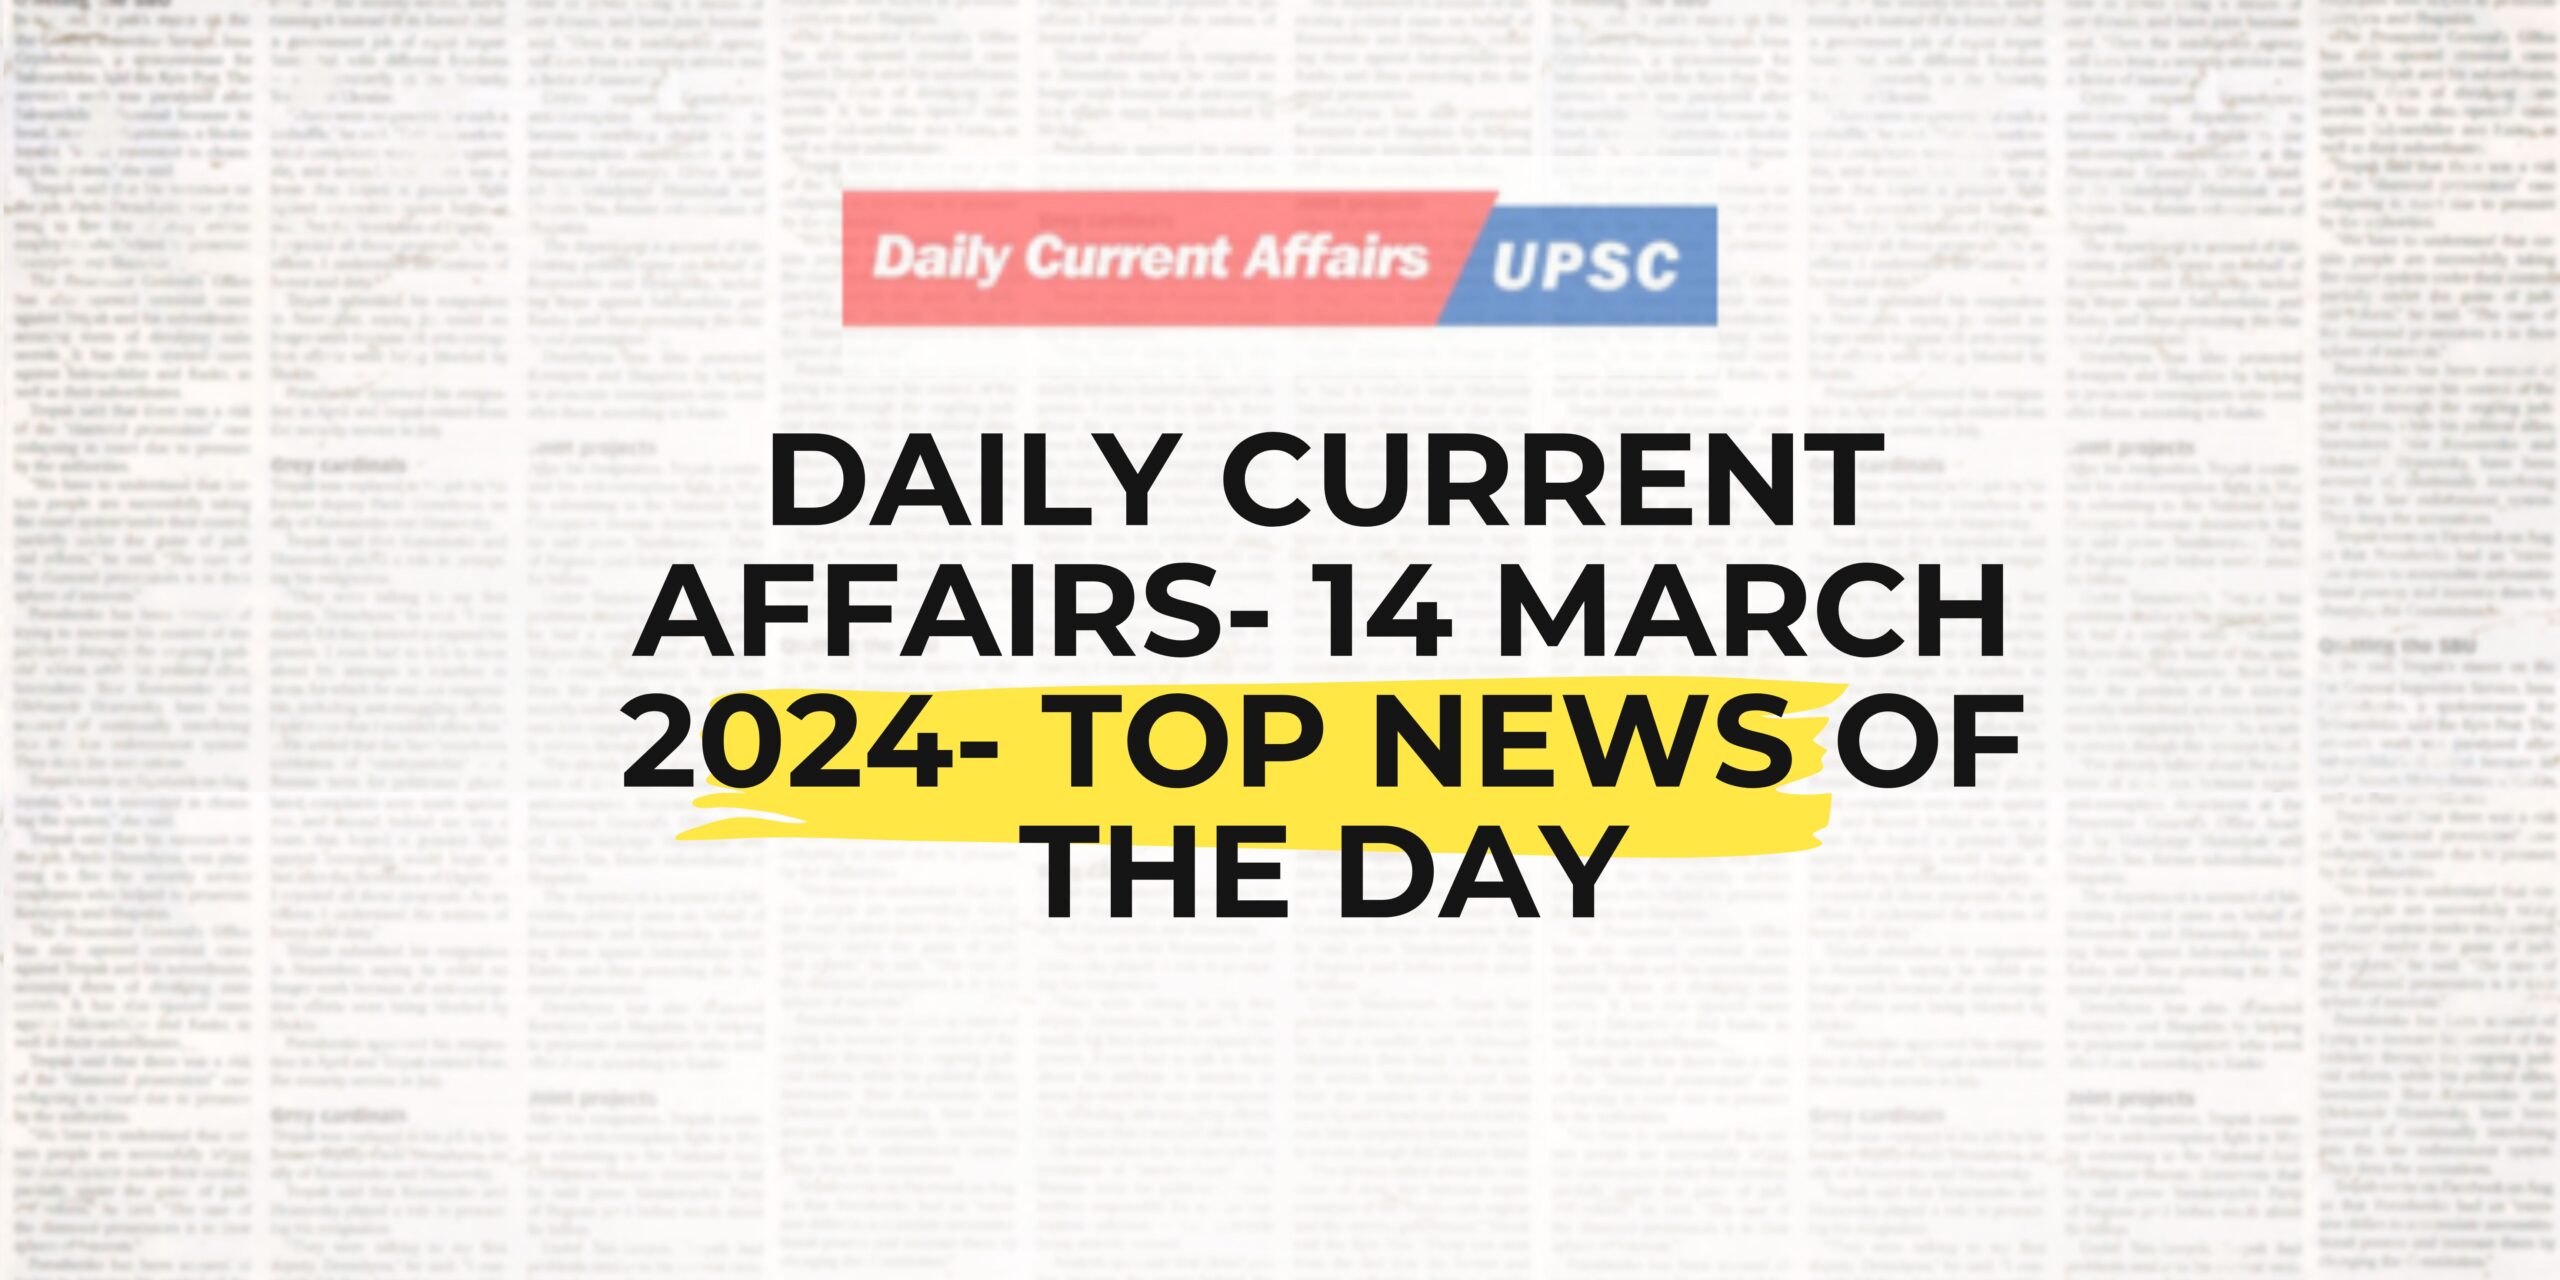 Daily Current Affairs 14 March 2024- Top News Of The Day